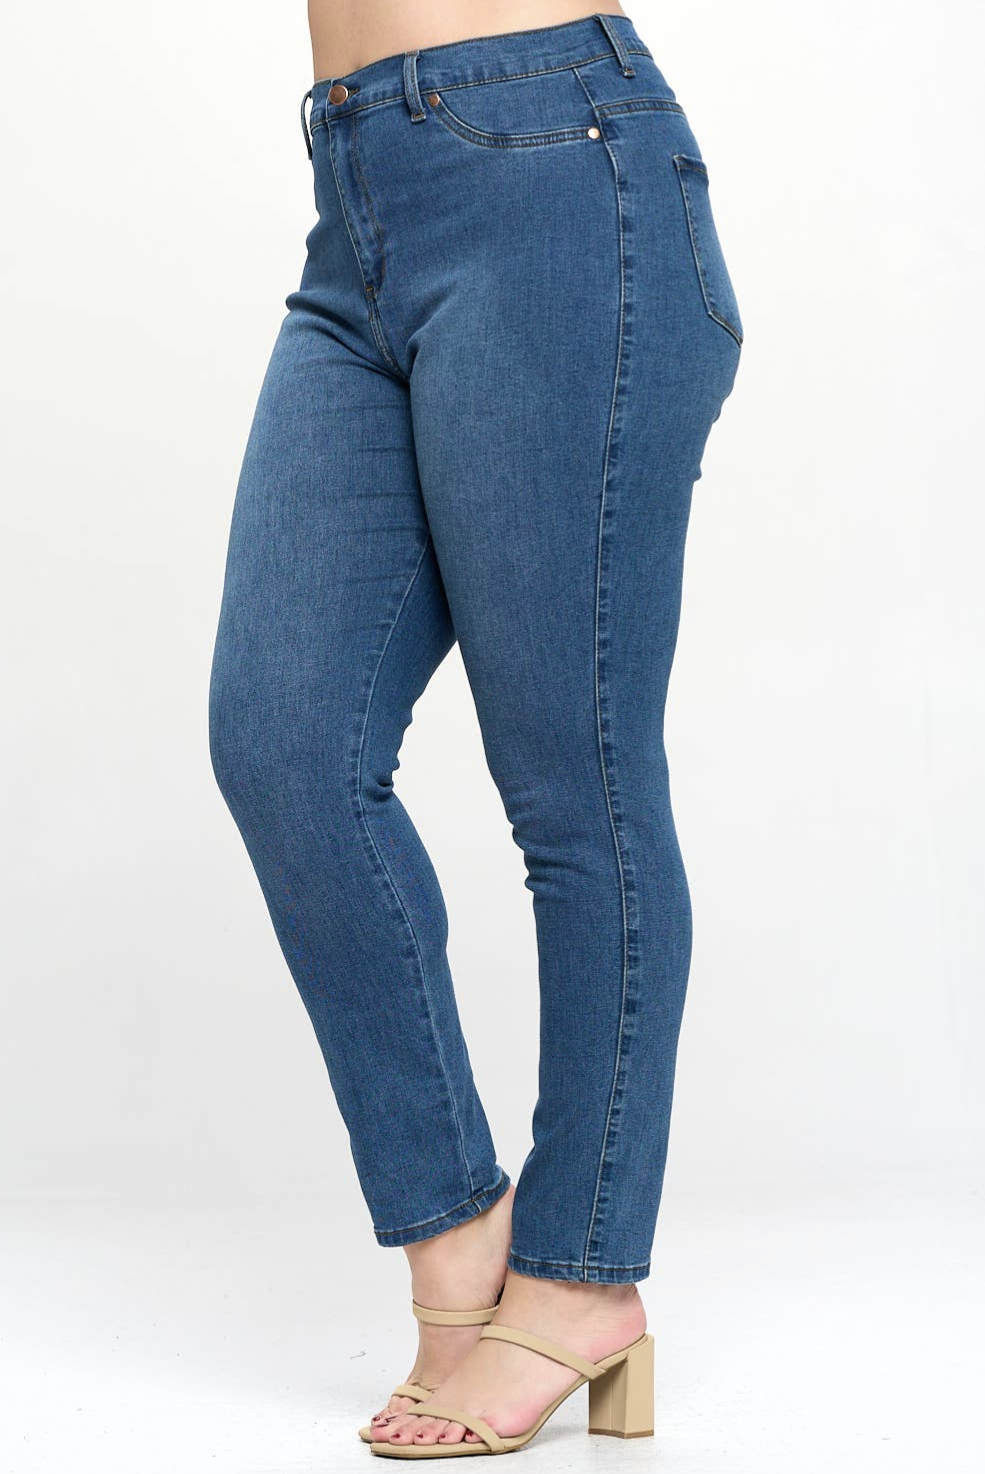 Plus Size High Waisted Skinny Jeans Super Stretch